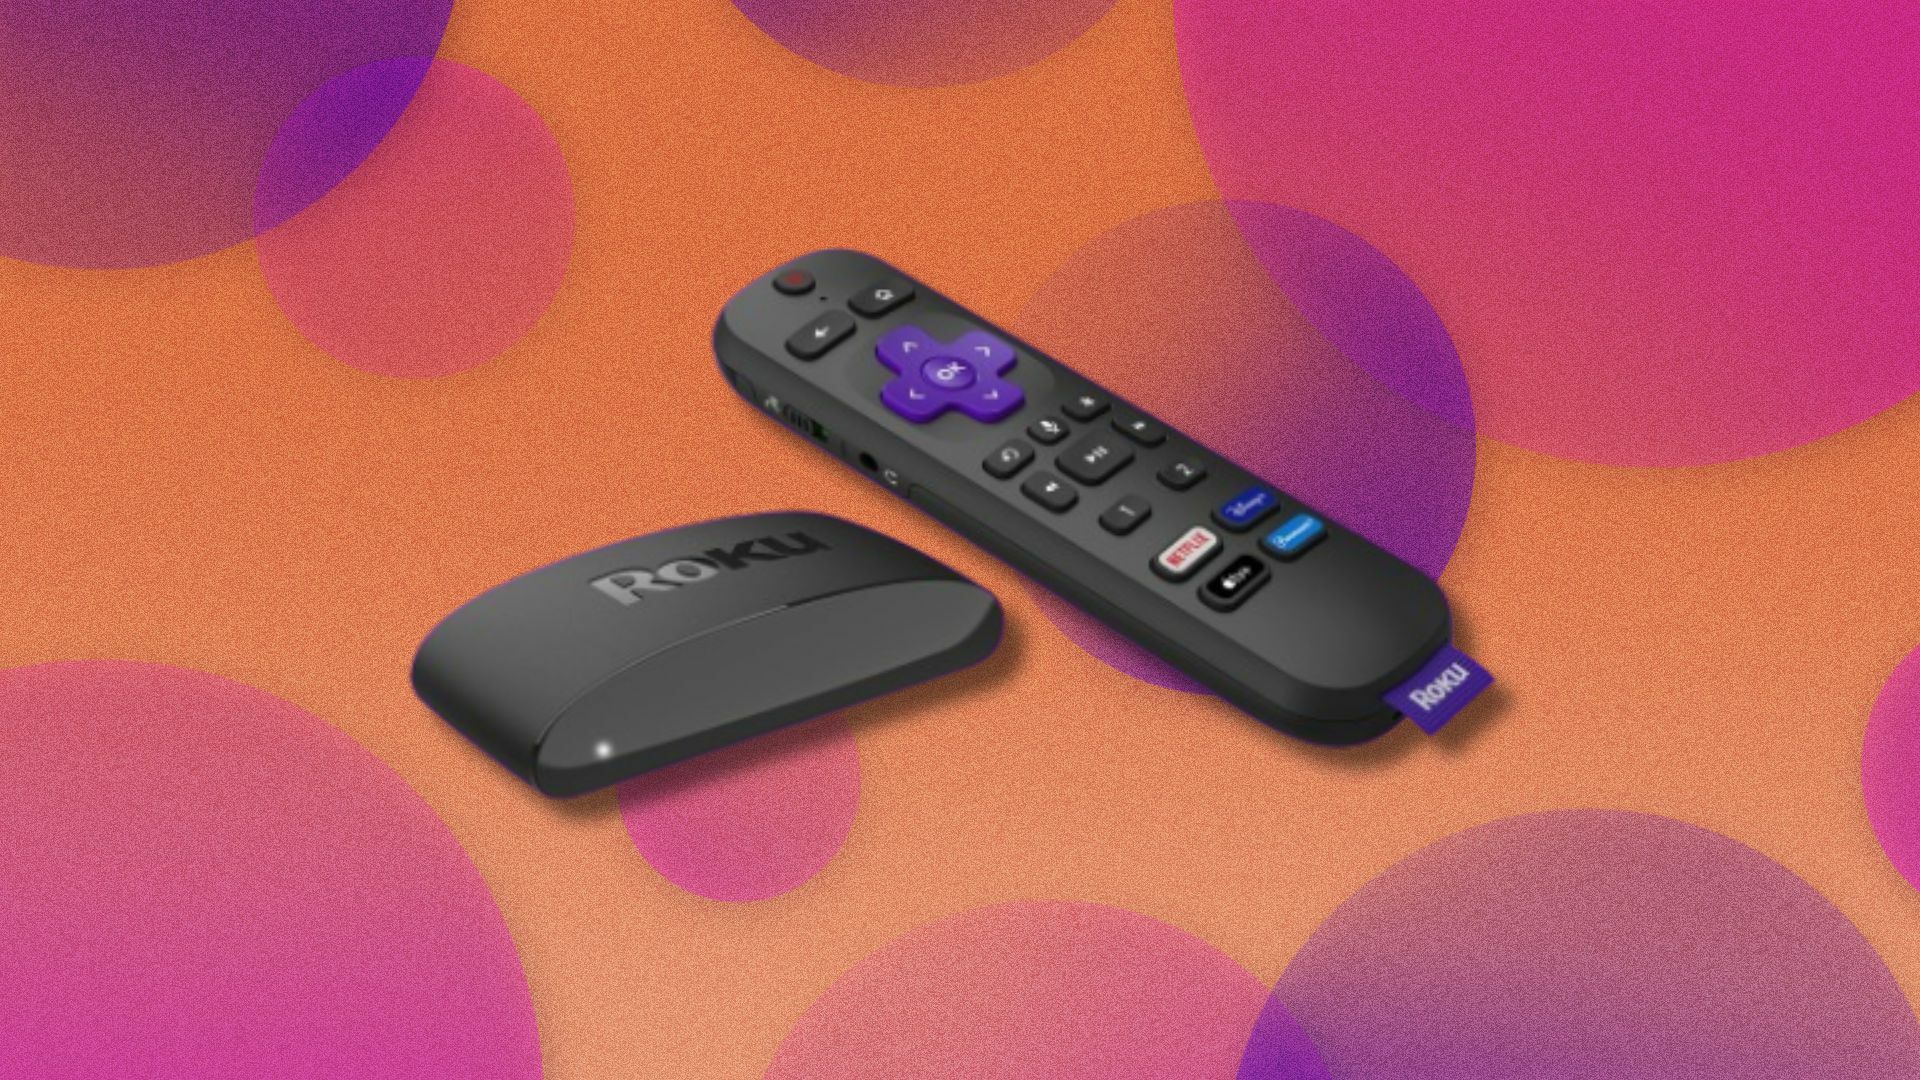 a roku remote and receiver on an orange background with purple and pink semi-transparent circles